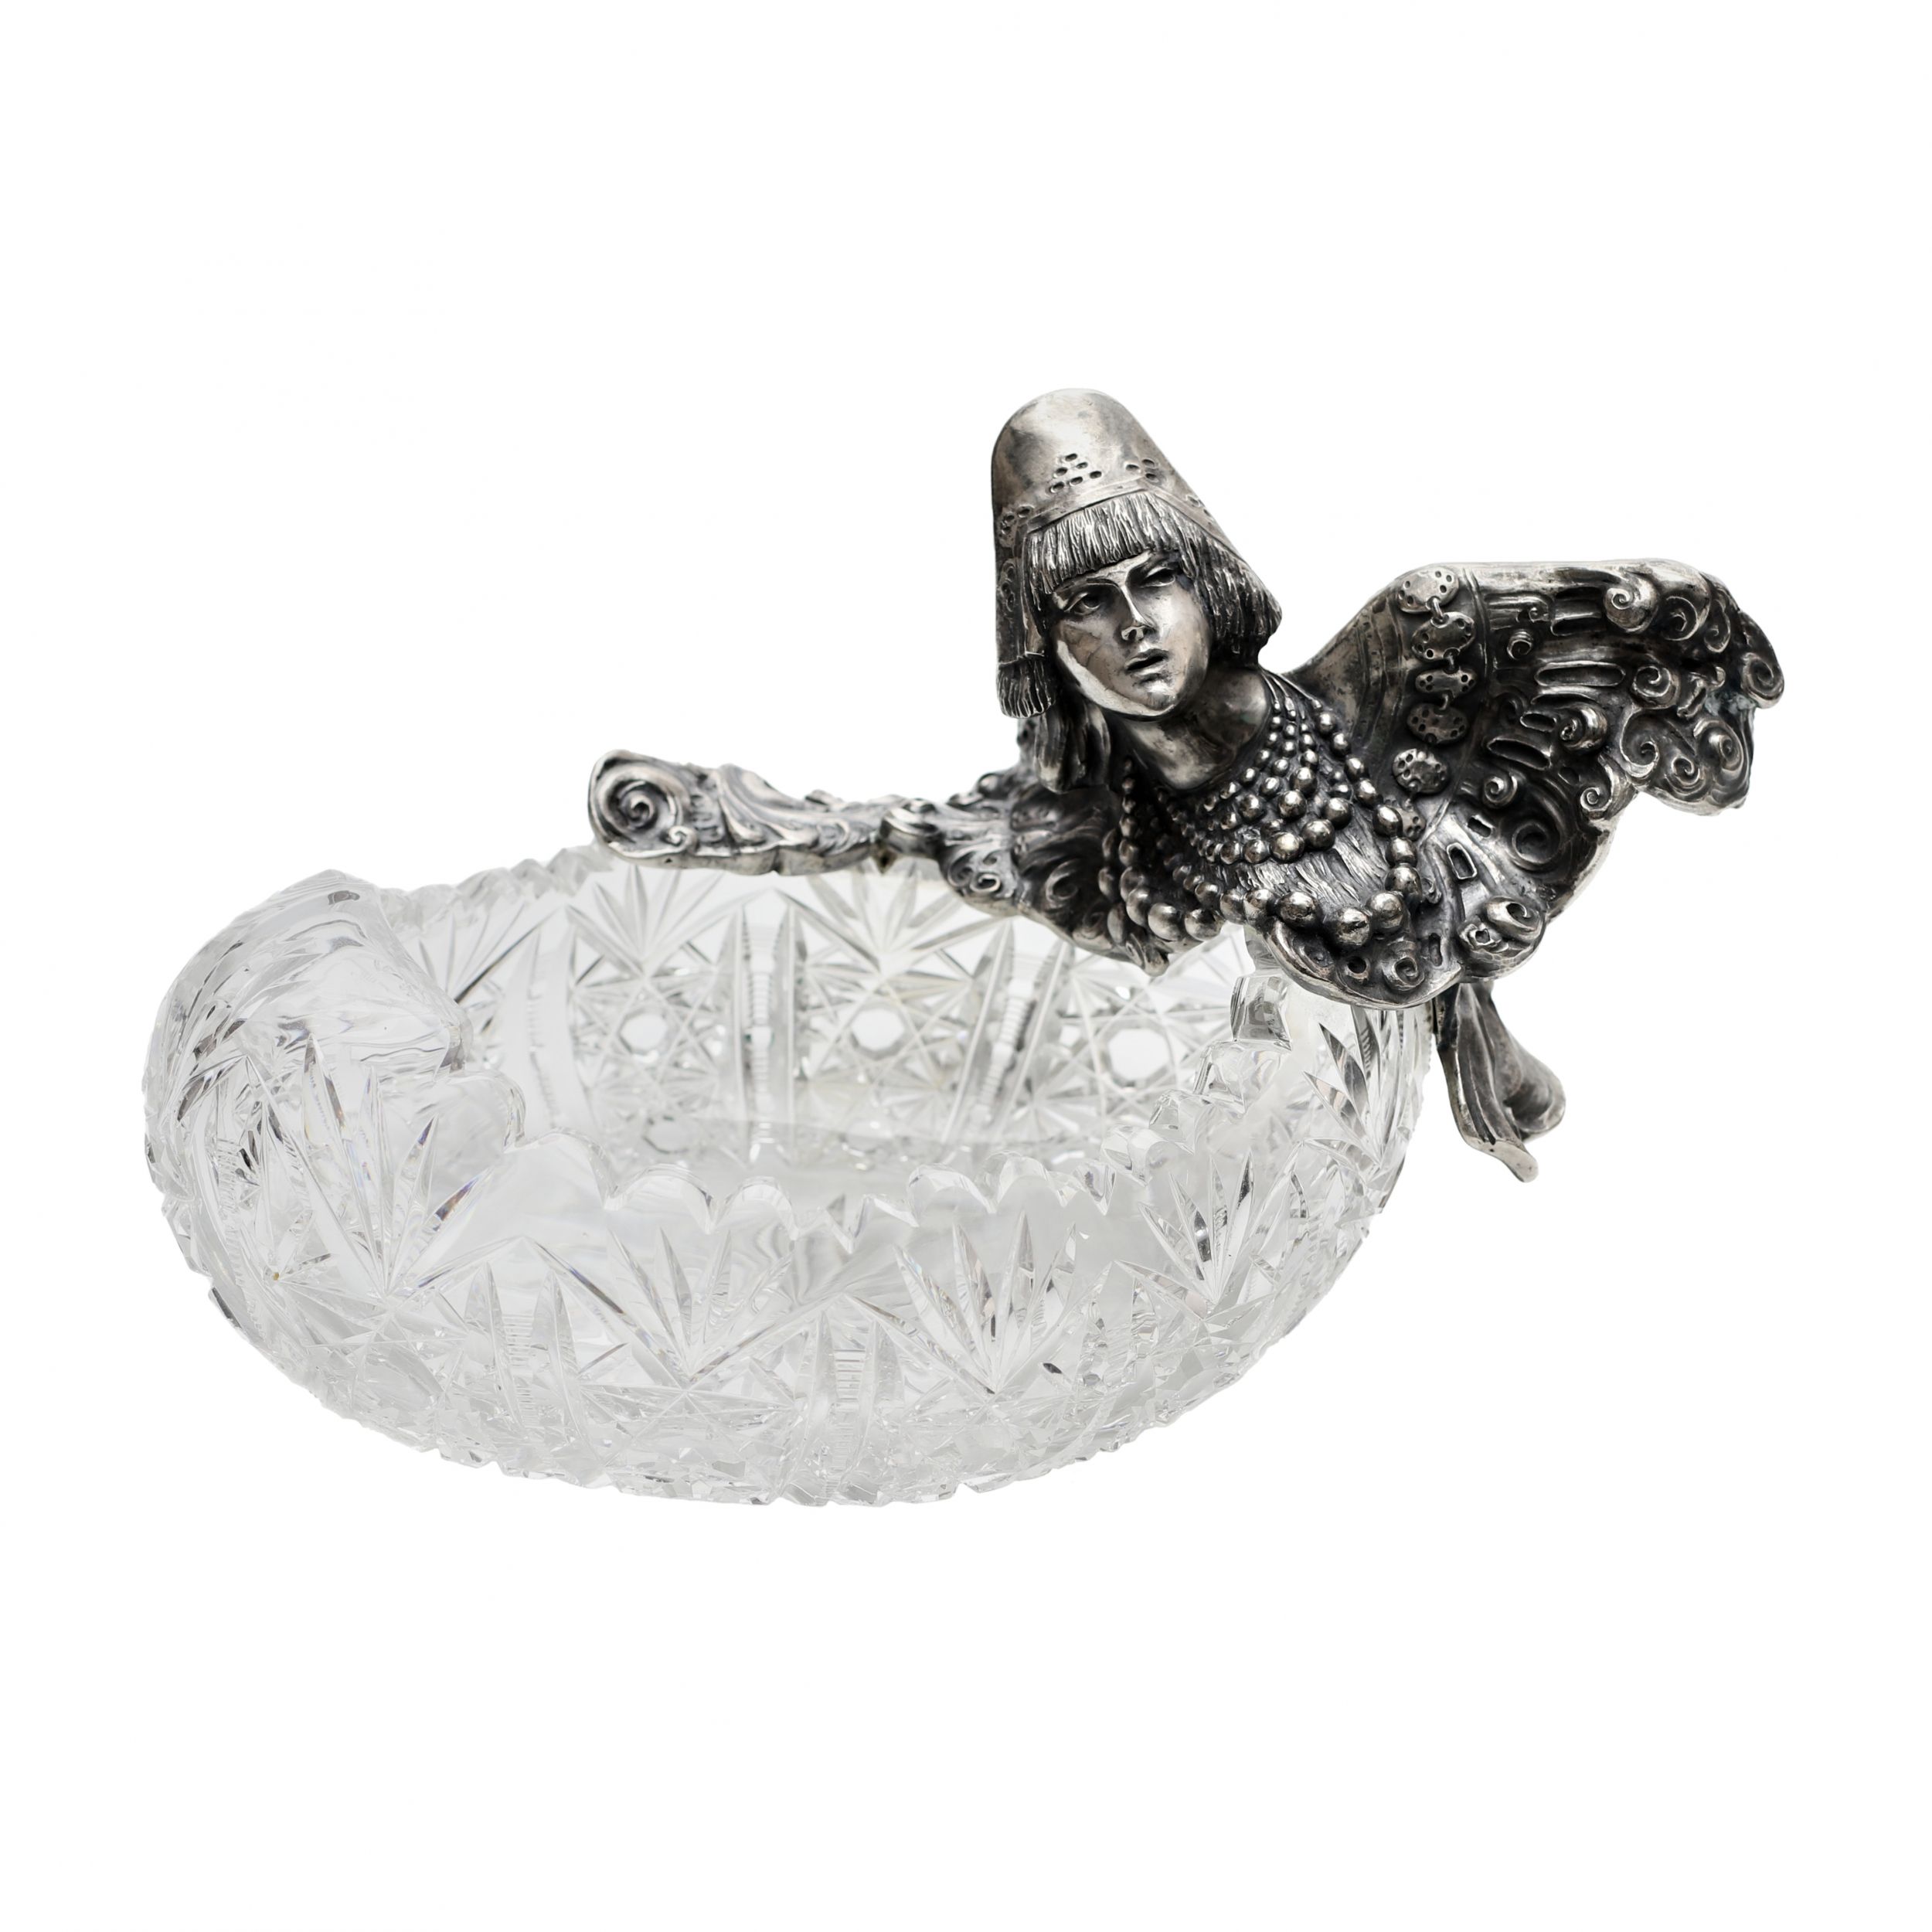 Russian-fruit-pot-made-of-heavy-crystal-and-silver-in-the-form-of-a-female-figure---the-Alkonost-bird-